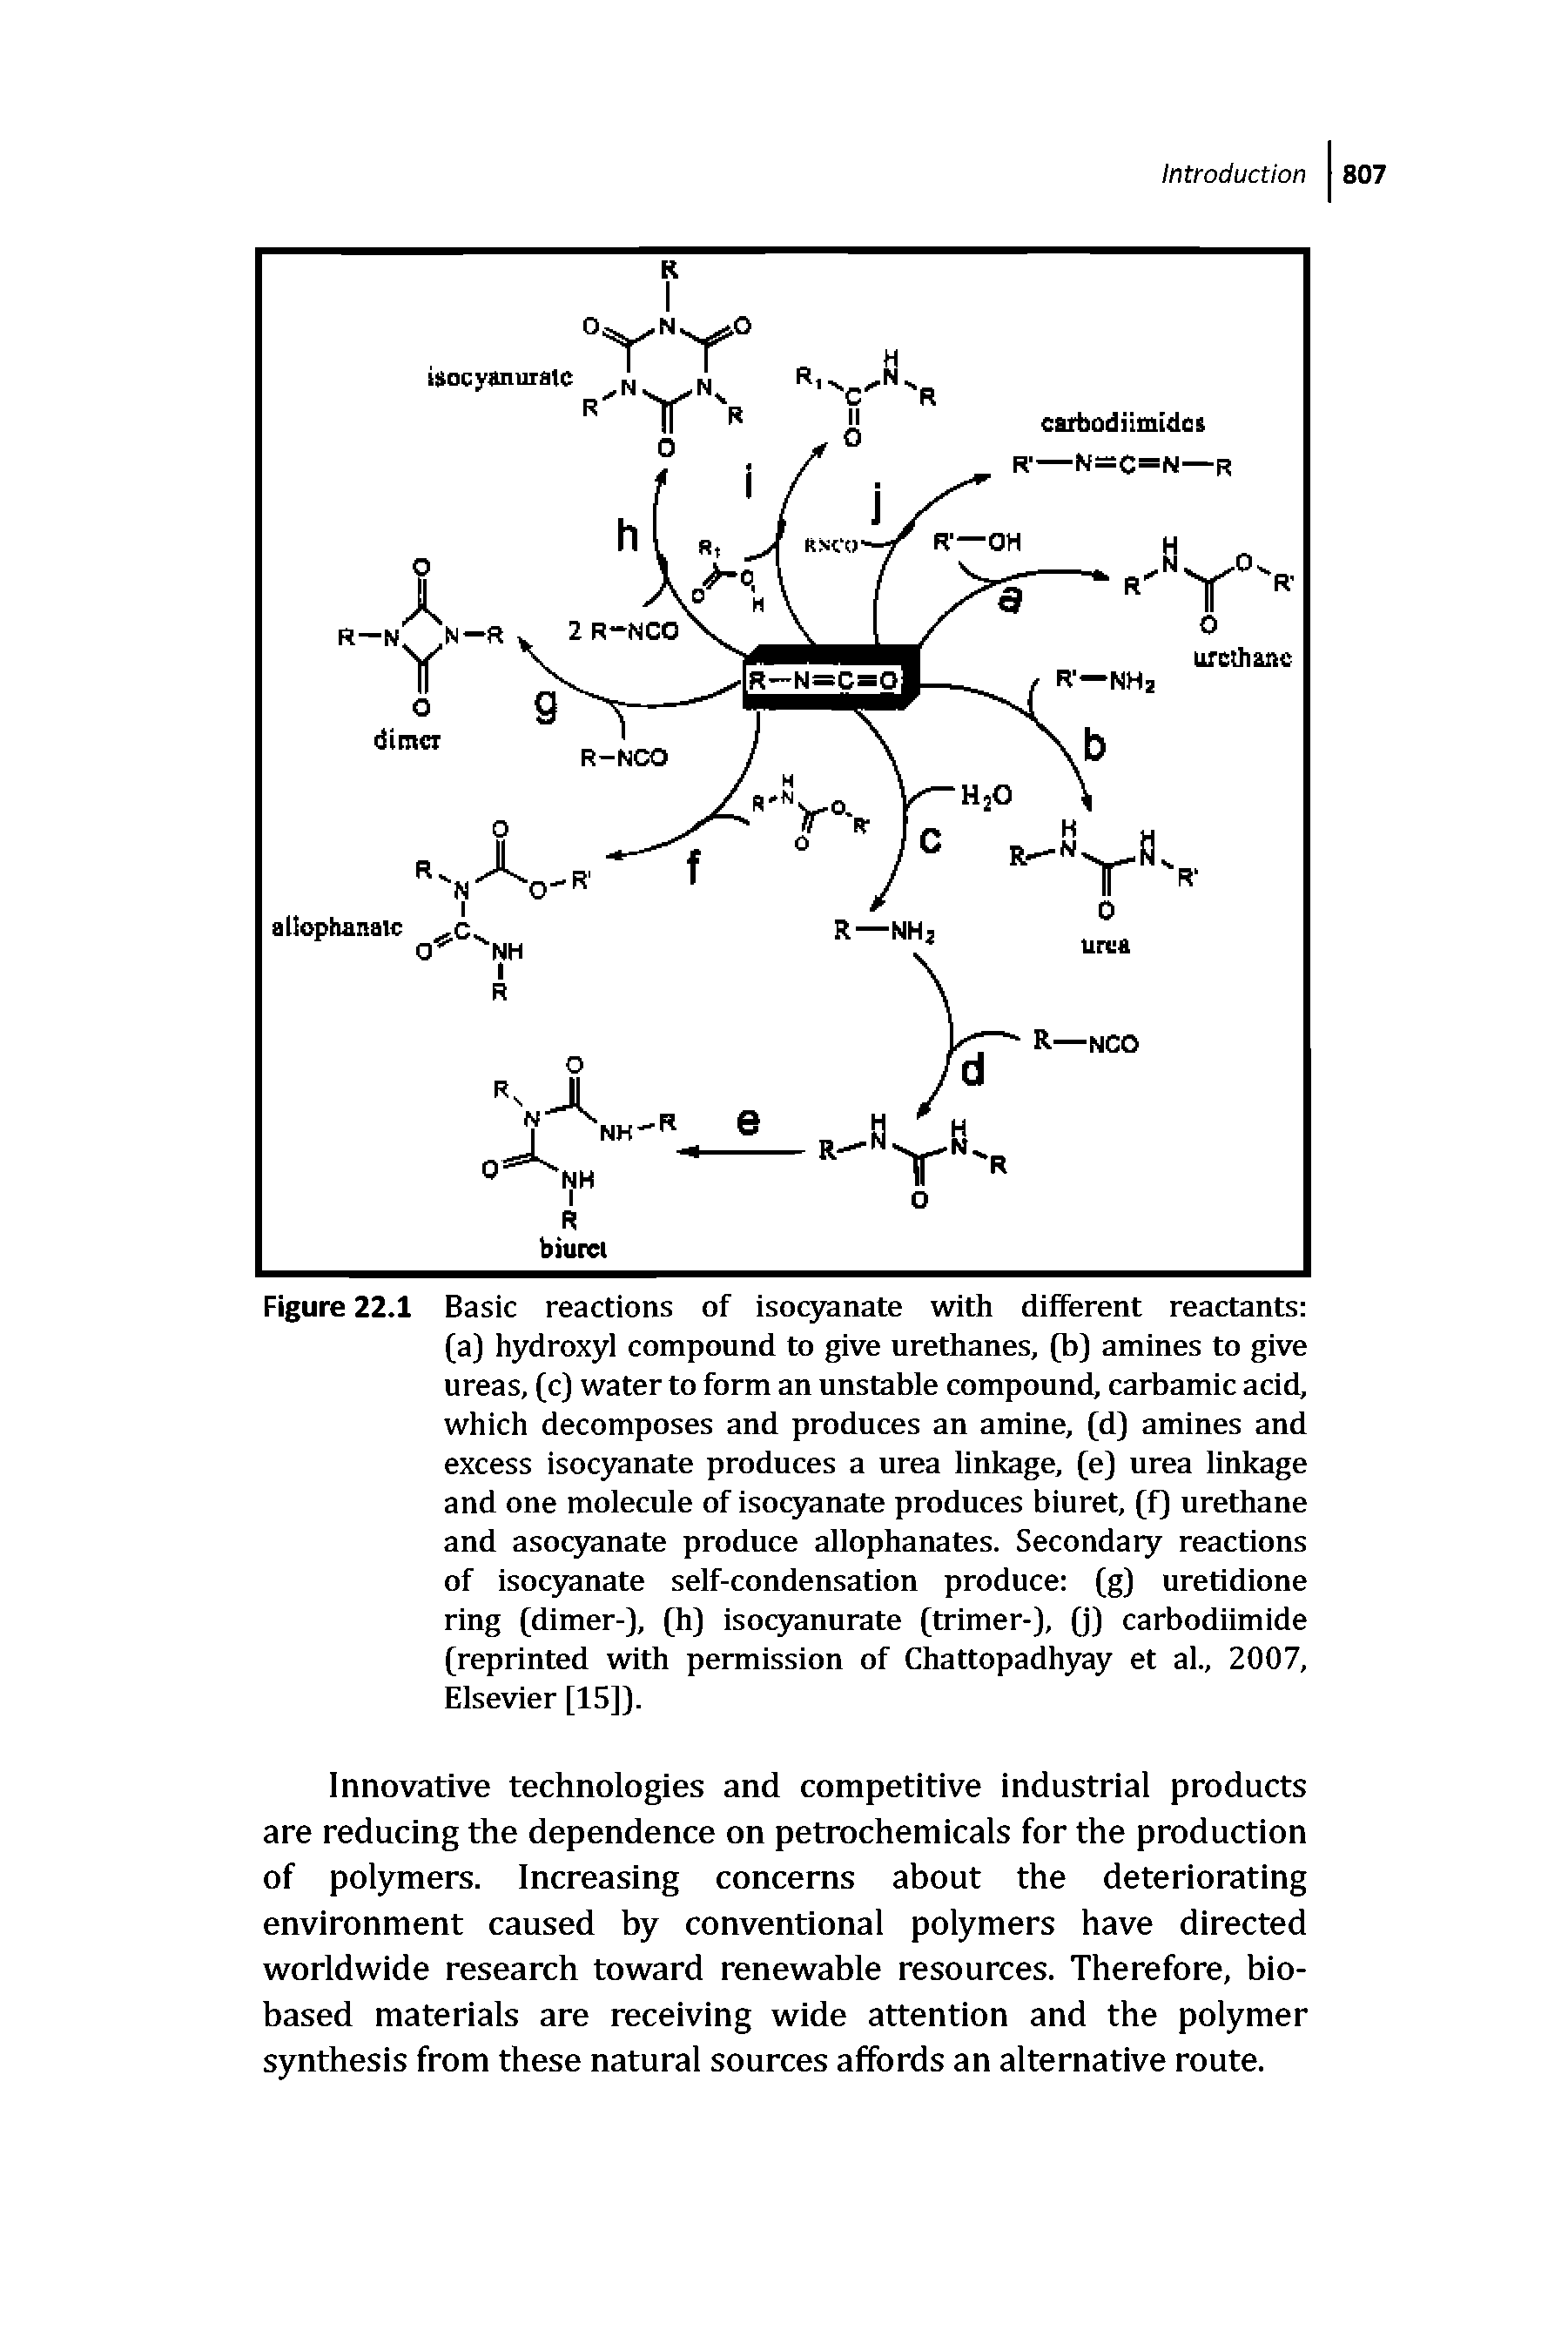 Figure 22.1 Basic reactions of isoq nate with different reactants (a) hydroxyl compound to give urethanes, (b) amines to give ureas, (c) water to form an unstable compound, carbamic acid, which decomposes and produces an amine, (d) amines and excess isocyanate produces a urea linkage, (e) urea linkage and one molecule of isocyanate produces biuret, (f) urethane and asocyanate produce allophanates. Secondary reactions of isoc3canate self-condensation produce (g) uretidione ring (dimer-), (h) isocyanurate (trimer-), (j) carbodiimide (reprinted with permission of Chattopadh3ray et al., 2007, Elsevier [15]).